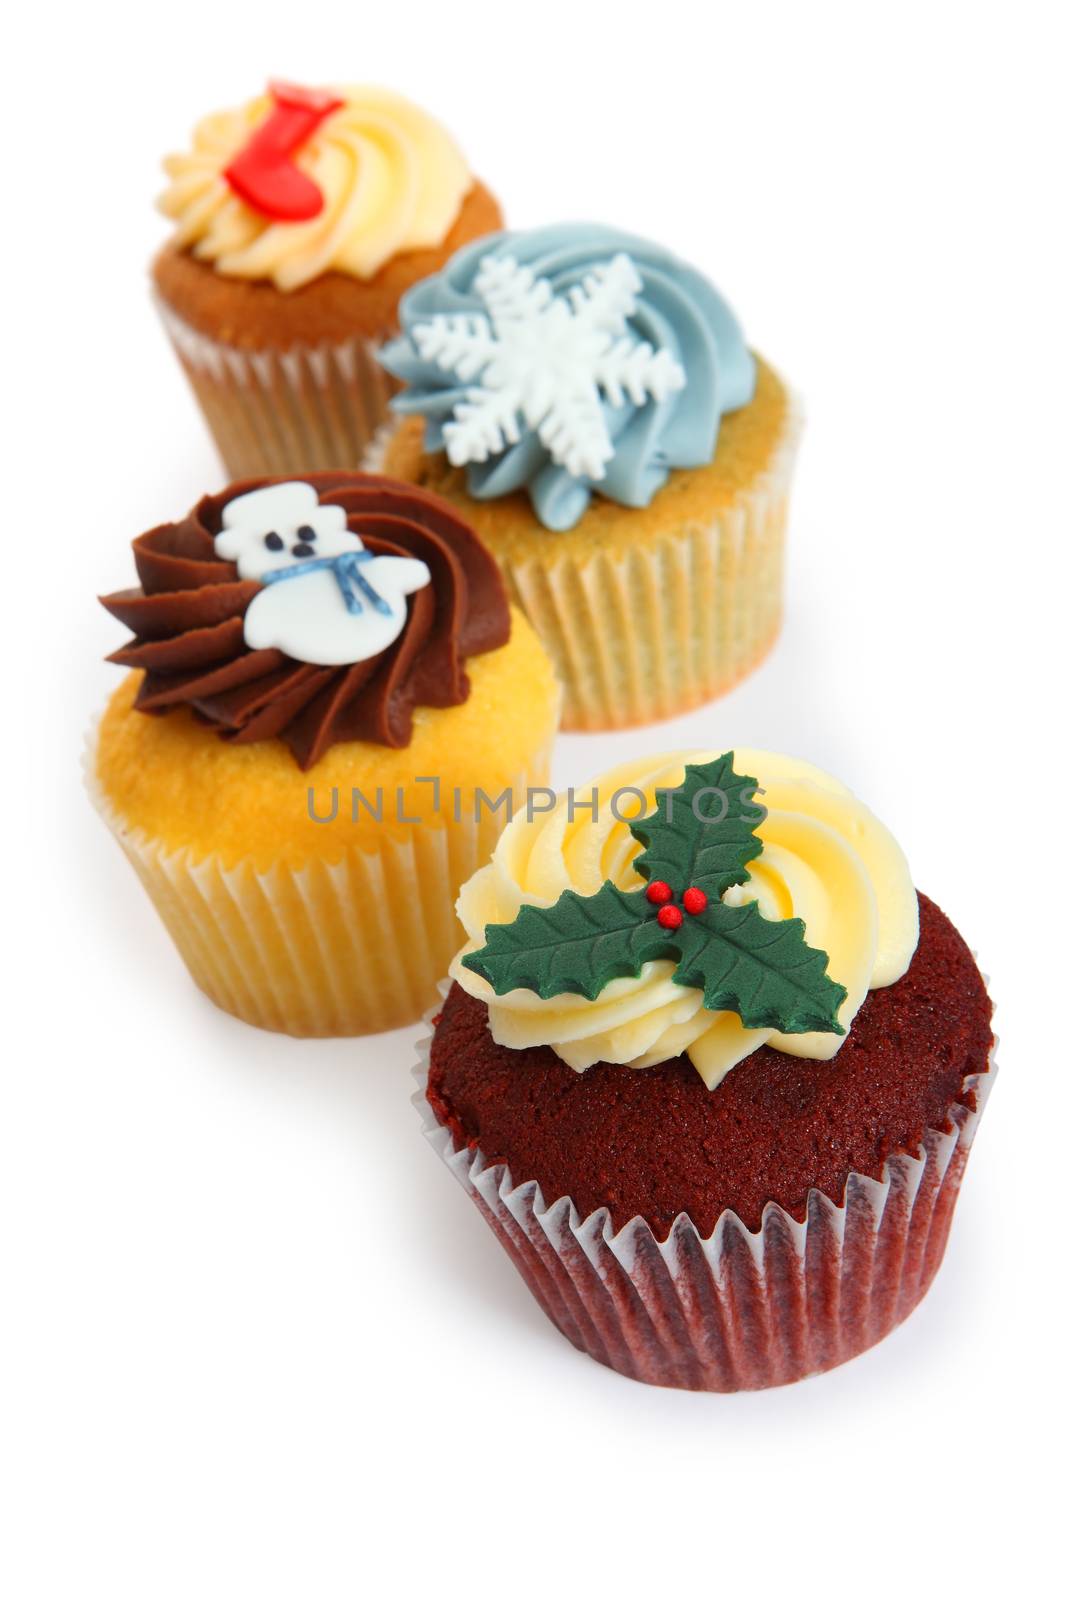 Cupcakes for Christmas by sumners